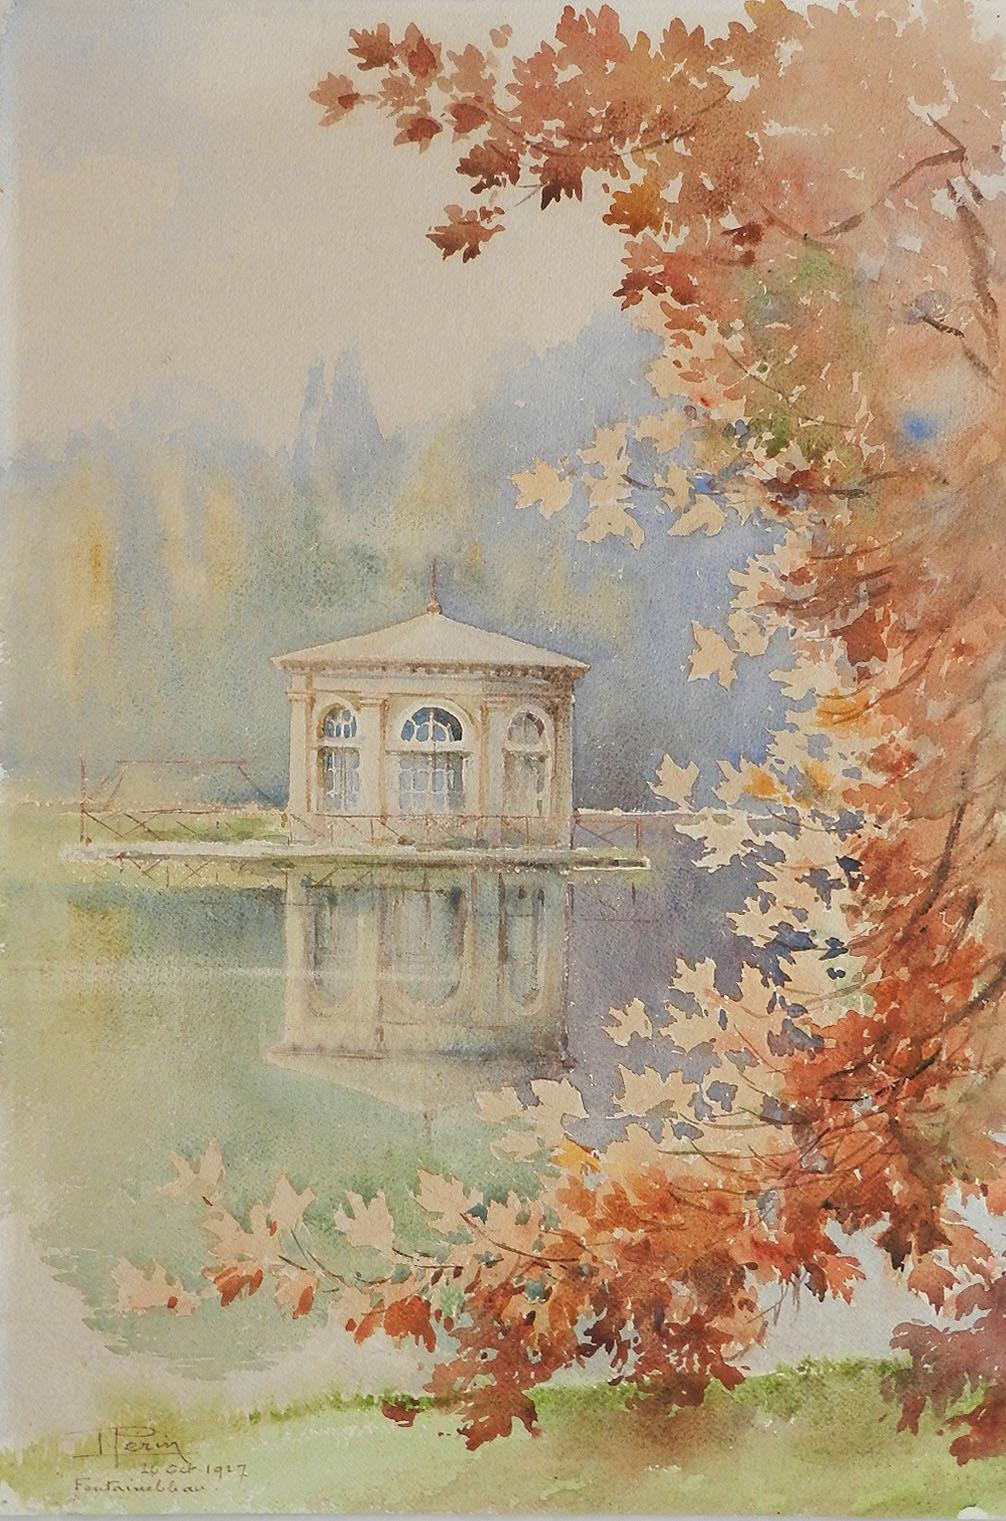 Watercolor Painting of Fontainebleau signed Louis Perin 26th Oct 1927
Louis Perin French Architect and Painter 1871-1940
On good art paper
Good condition with only very minor signs of age 
This will be shipped with its original frame without the